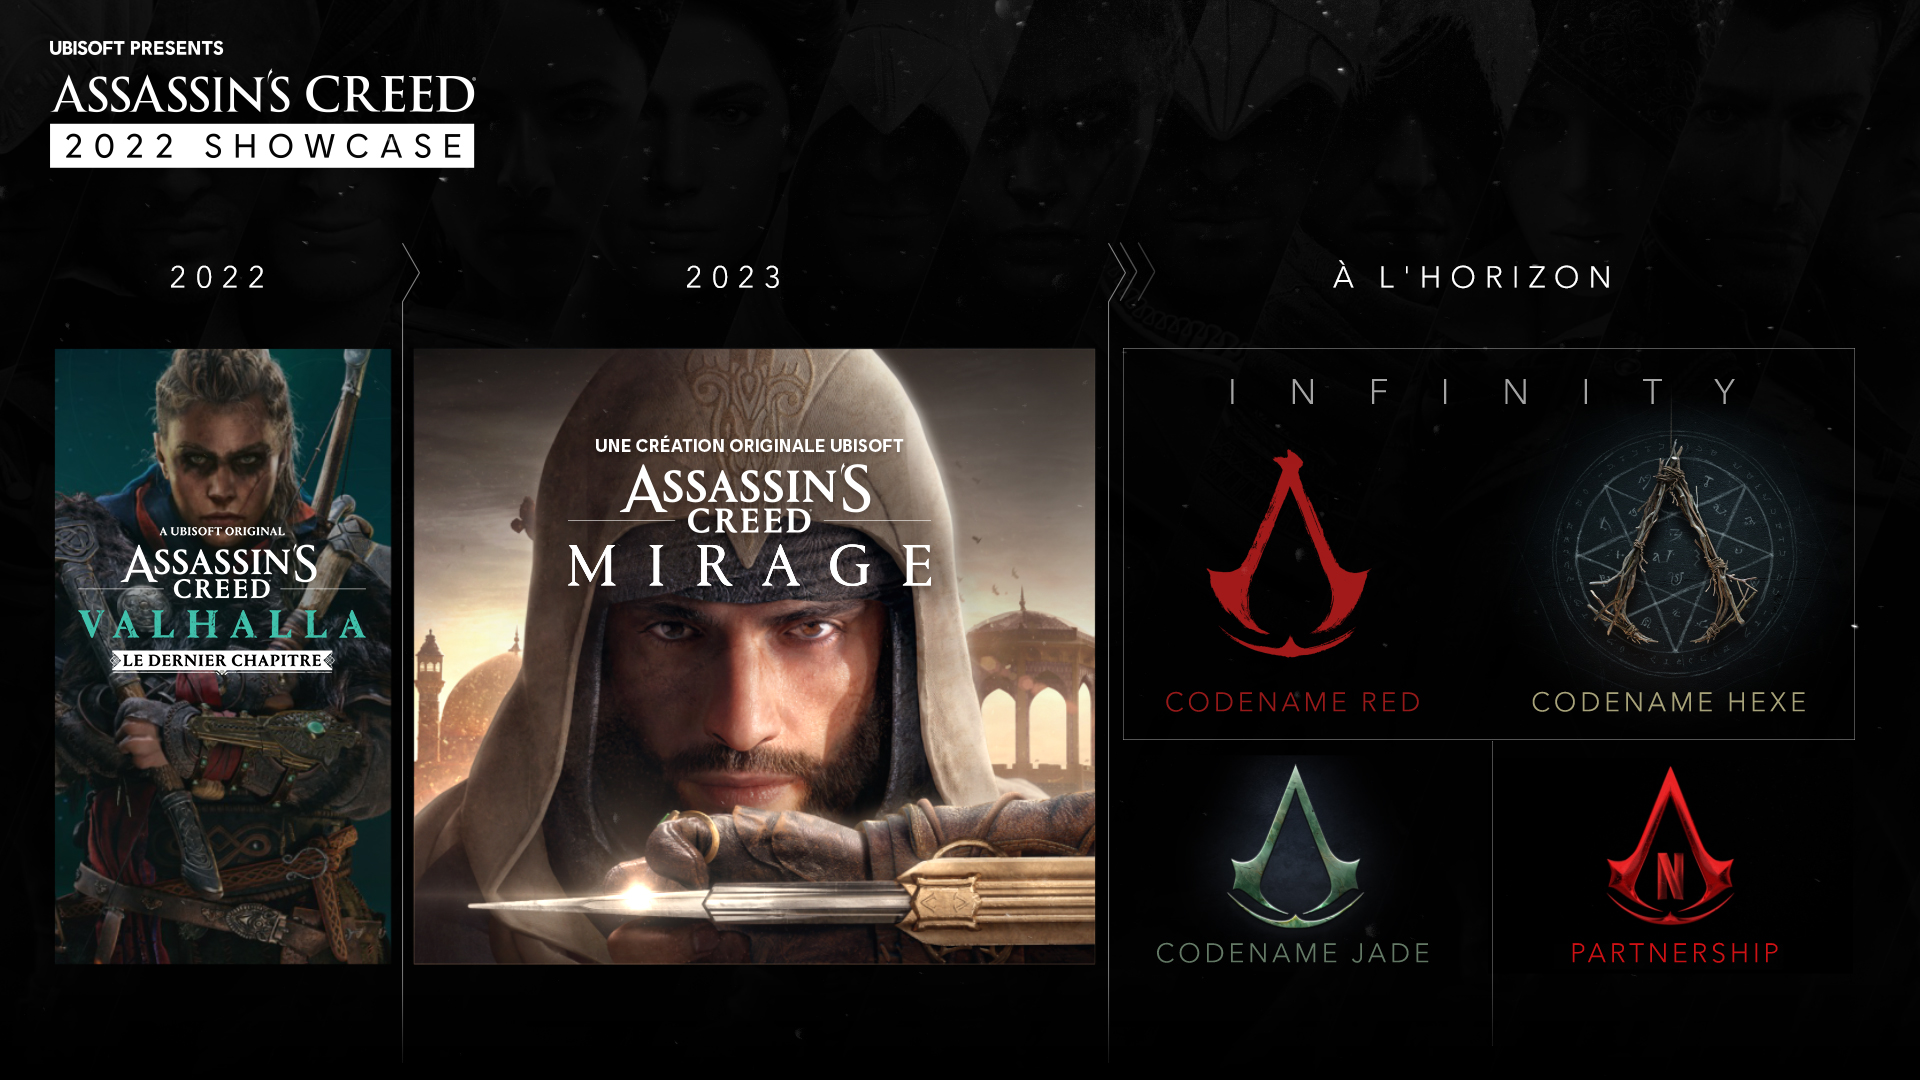 Assassin's Creed Valhalla isn't coming to Xbox Game Pass, Ubisoft confirms